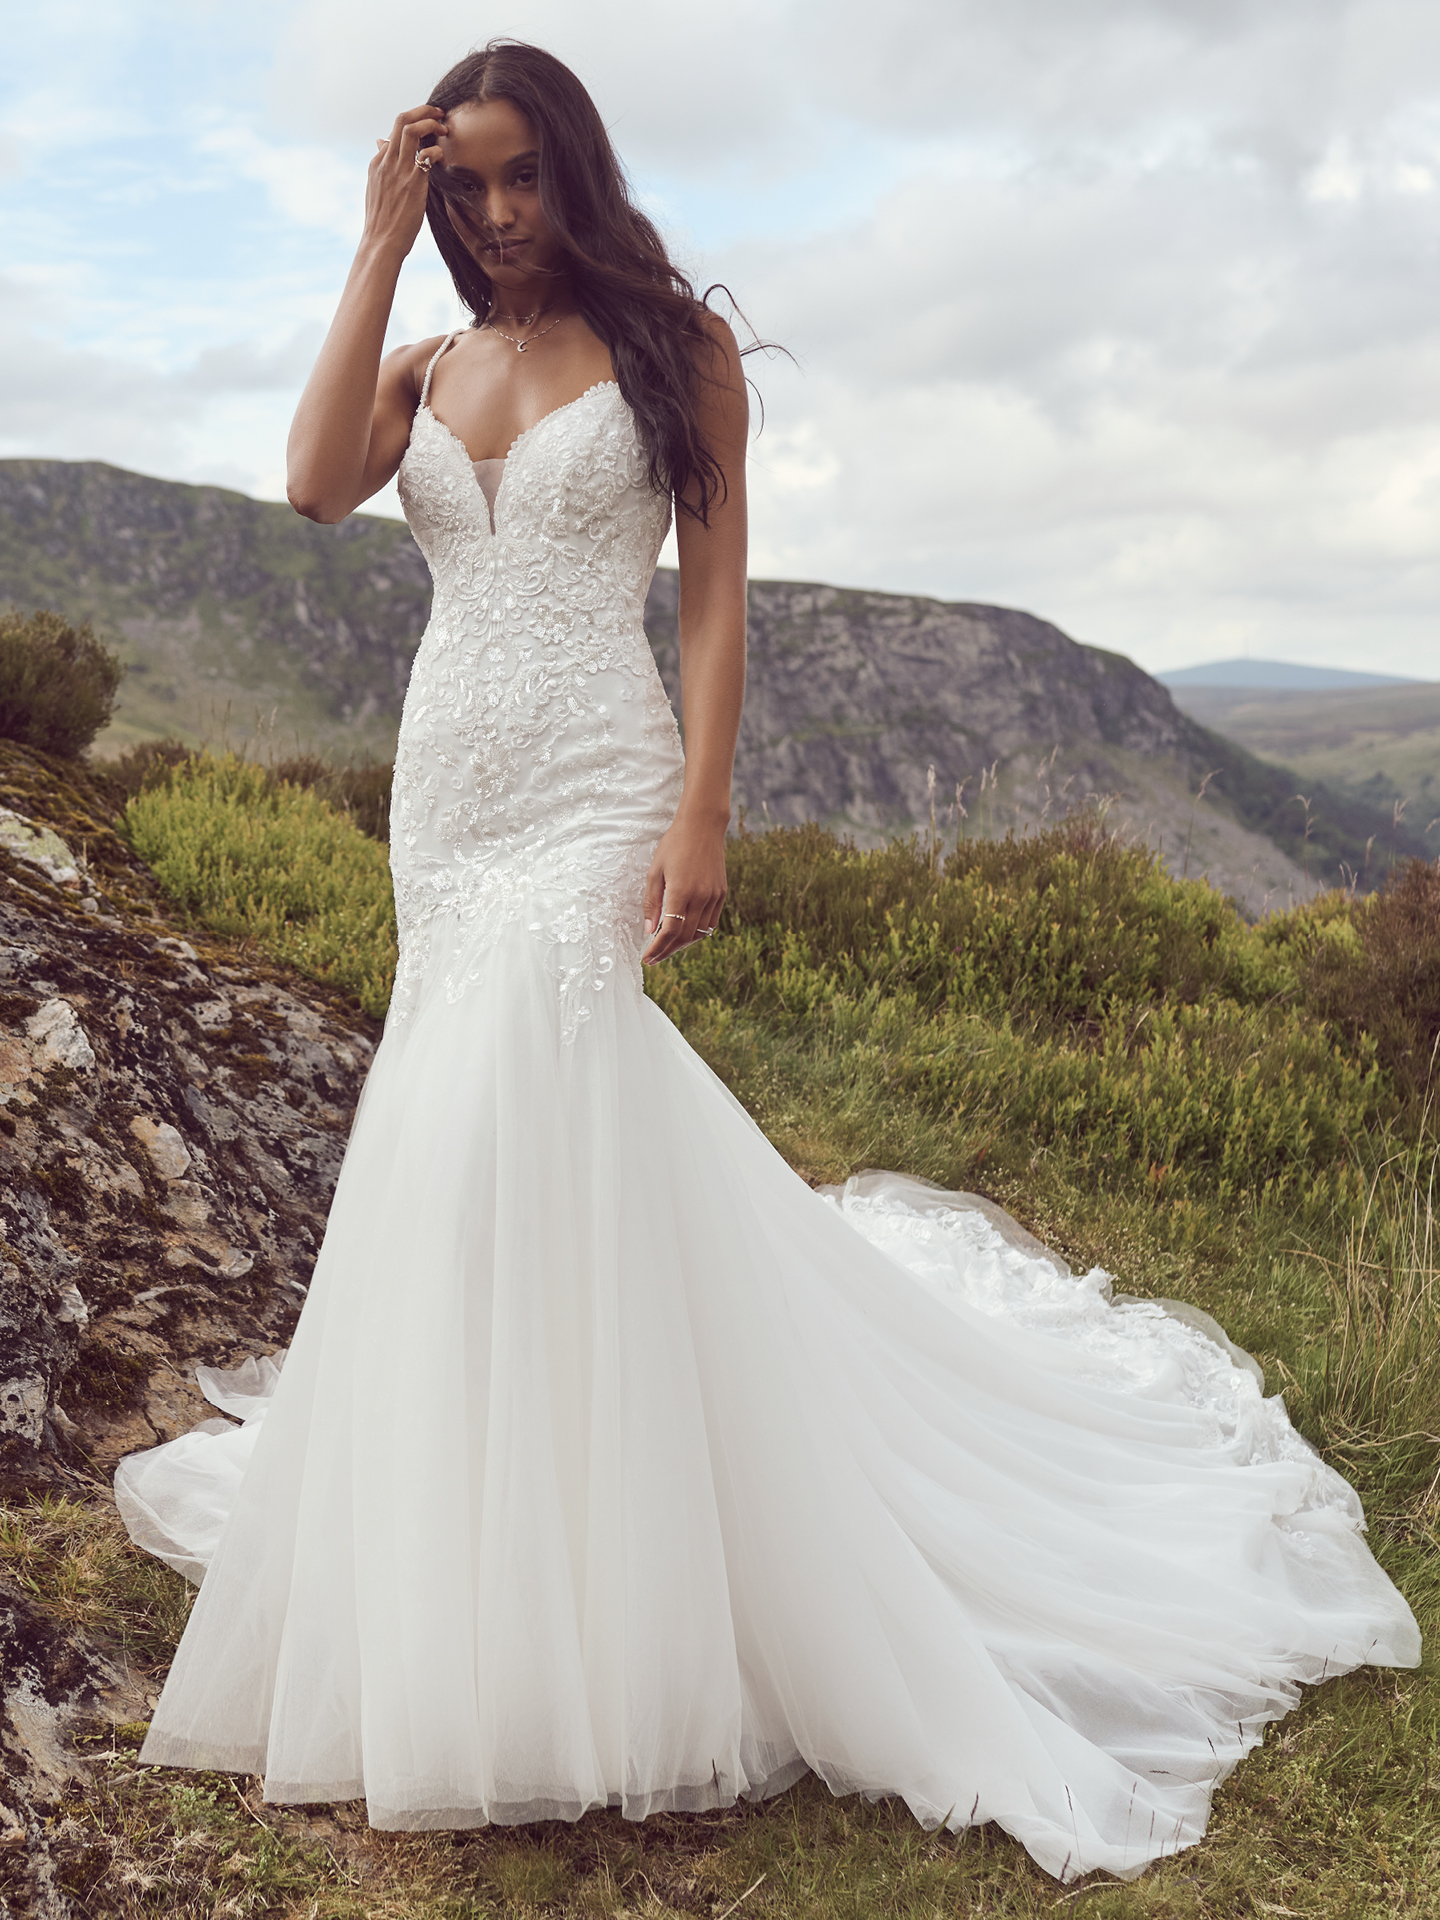 Bride In Fit And Flare Wedding Dress Called Beatrice By Rebecca Ingram